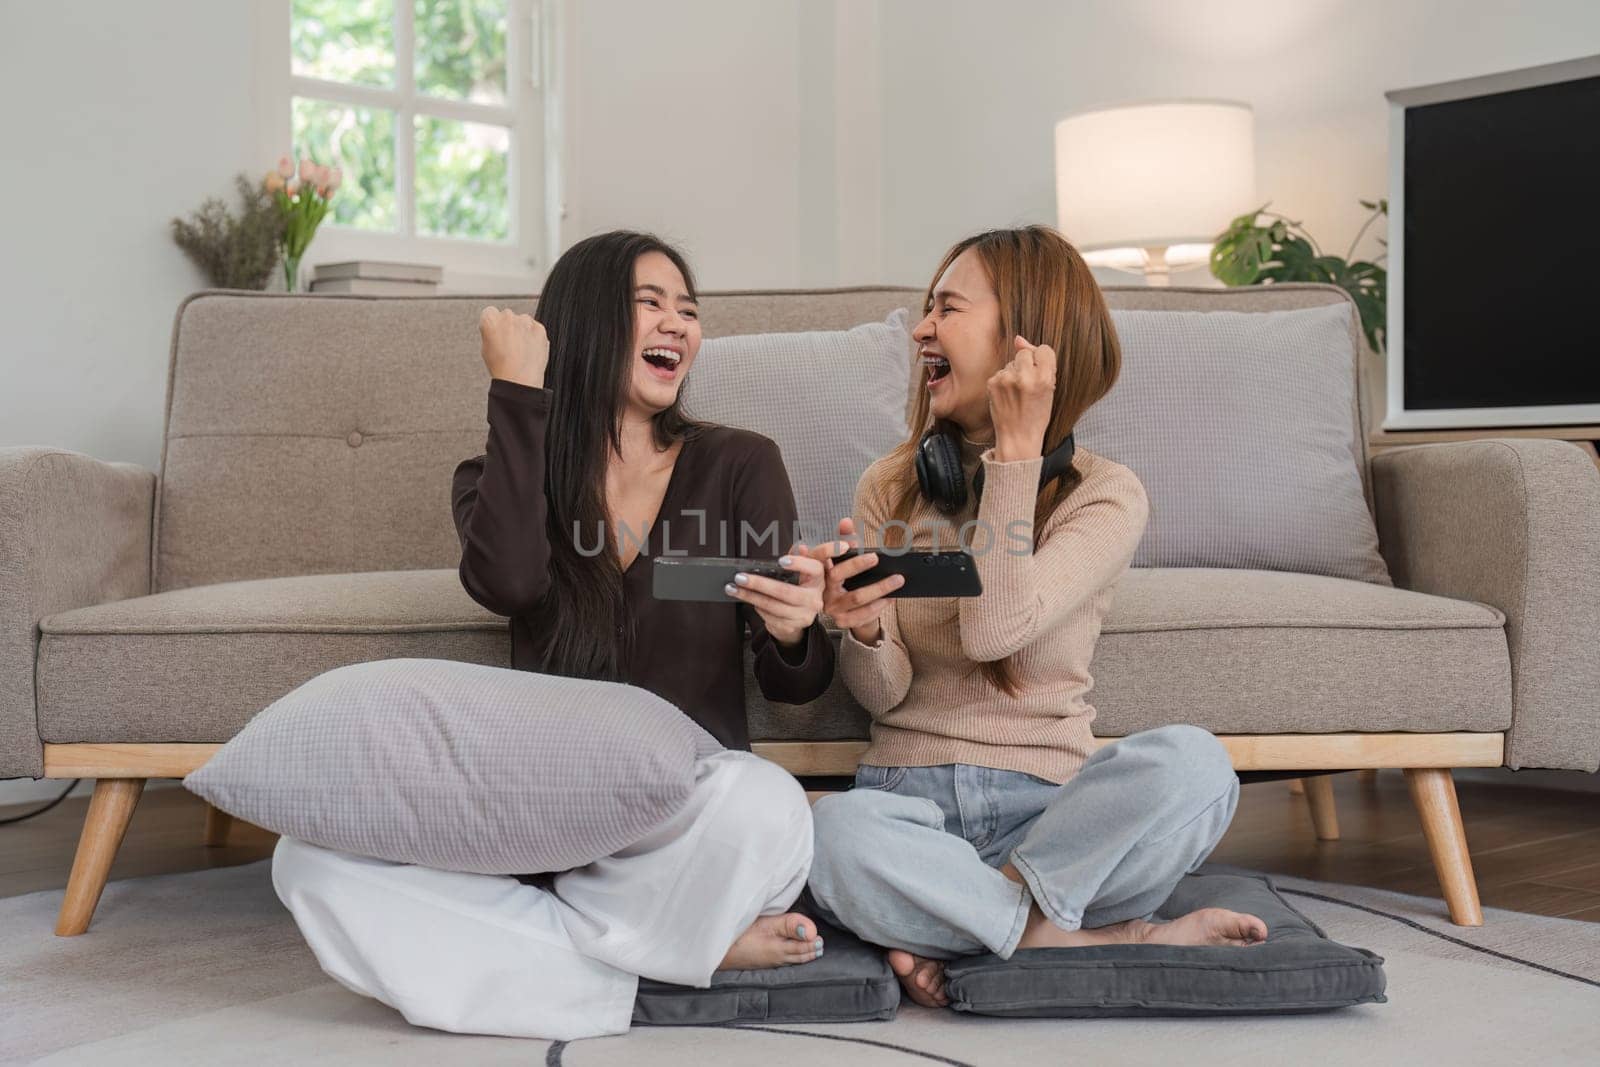 Happy lesbian couple having fun playing mobile games together in a cozy living room, celebrating and enjoying their time.